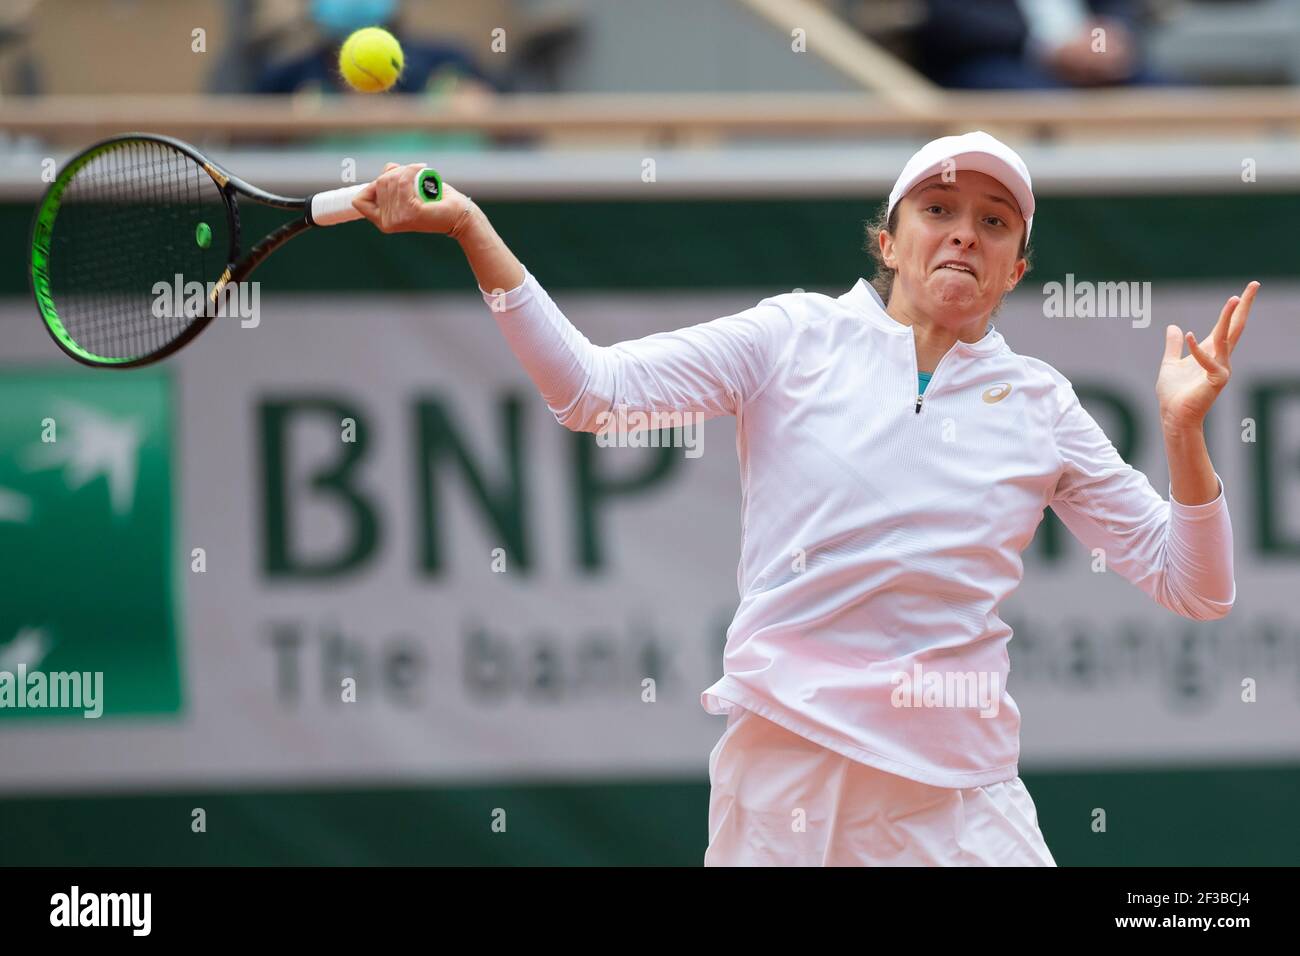 Polish tennis player Iga Swiatek playing a forehand shot during French Open 2020, Paris, France, Europe. Stock Photo